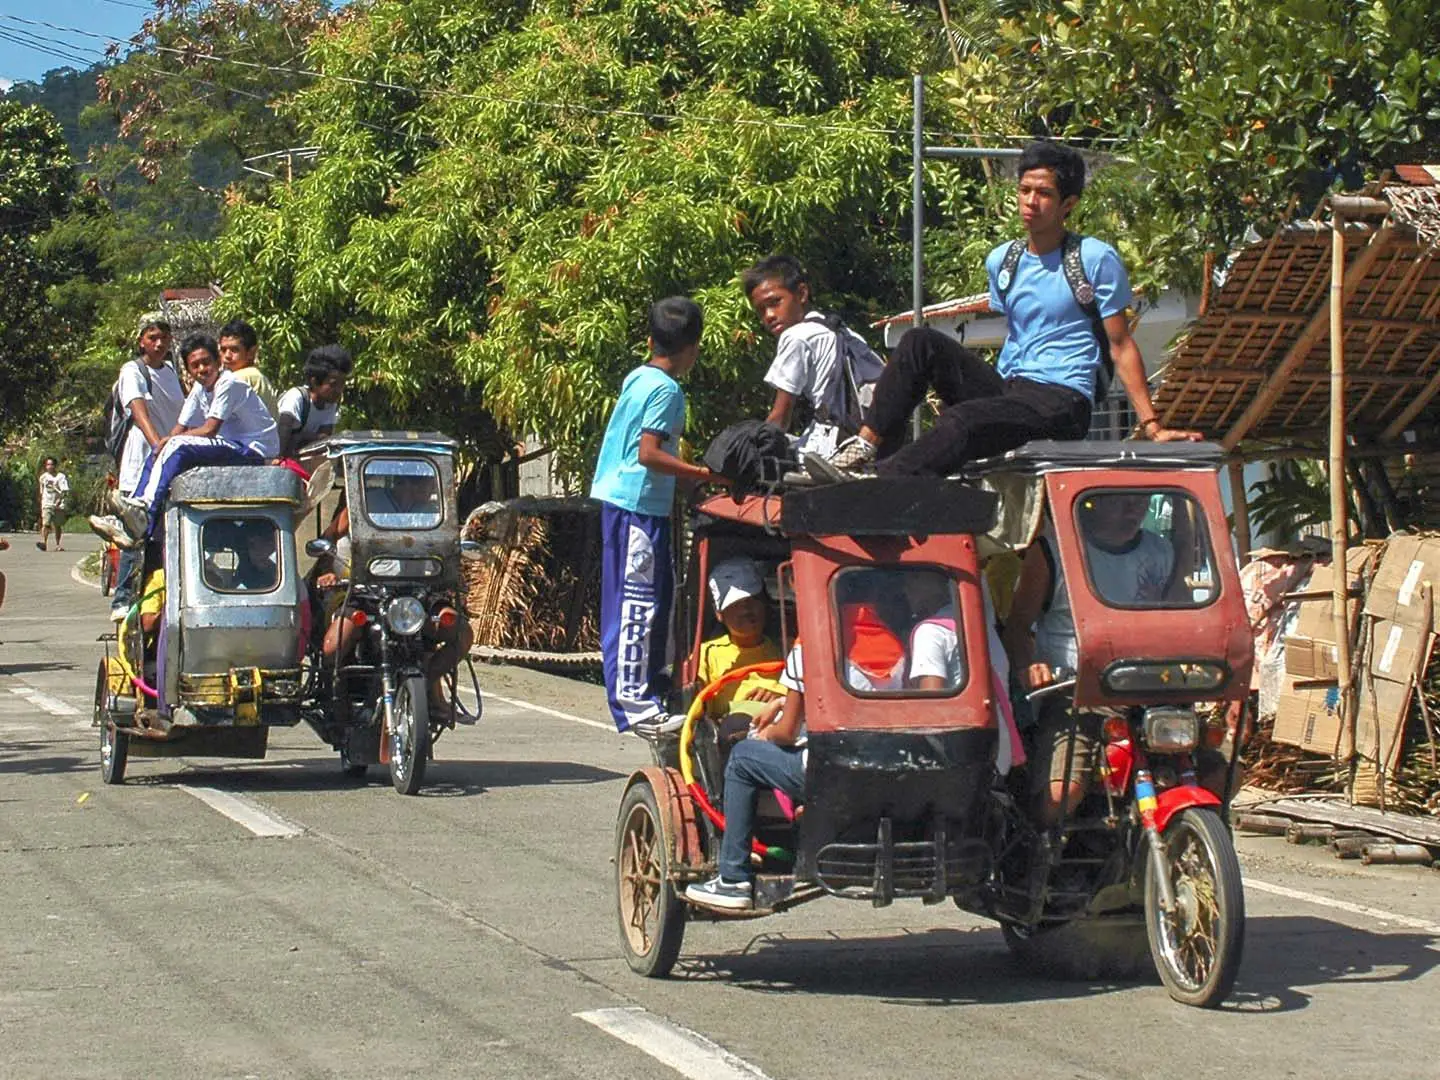 Sustainable Travel Tip: Ride tricycles or public transportation while traveling in the Philippines